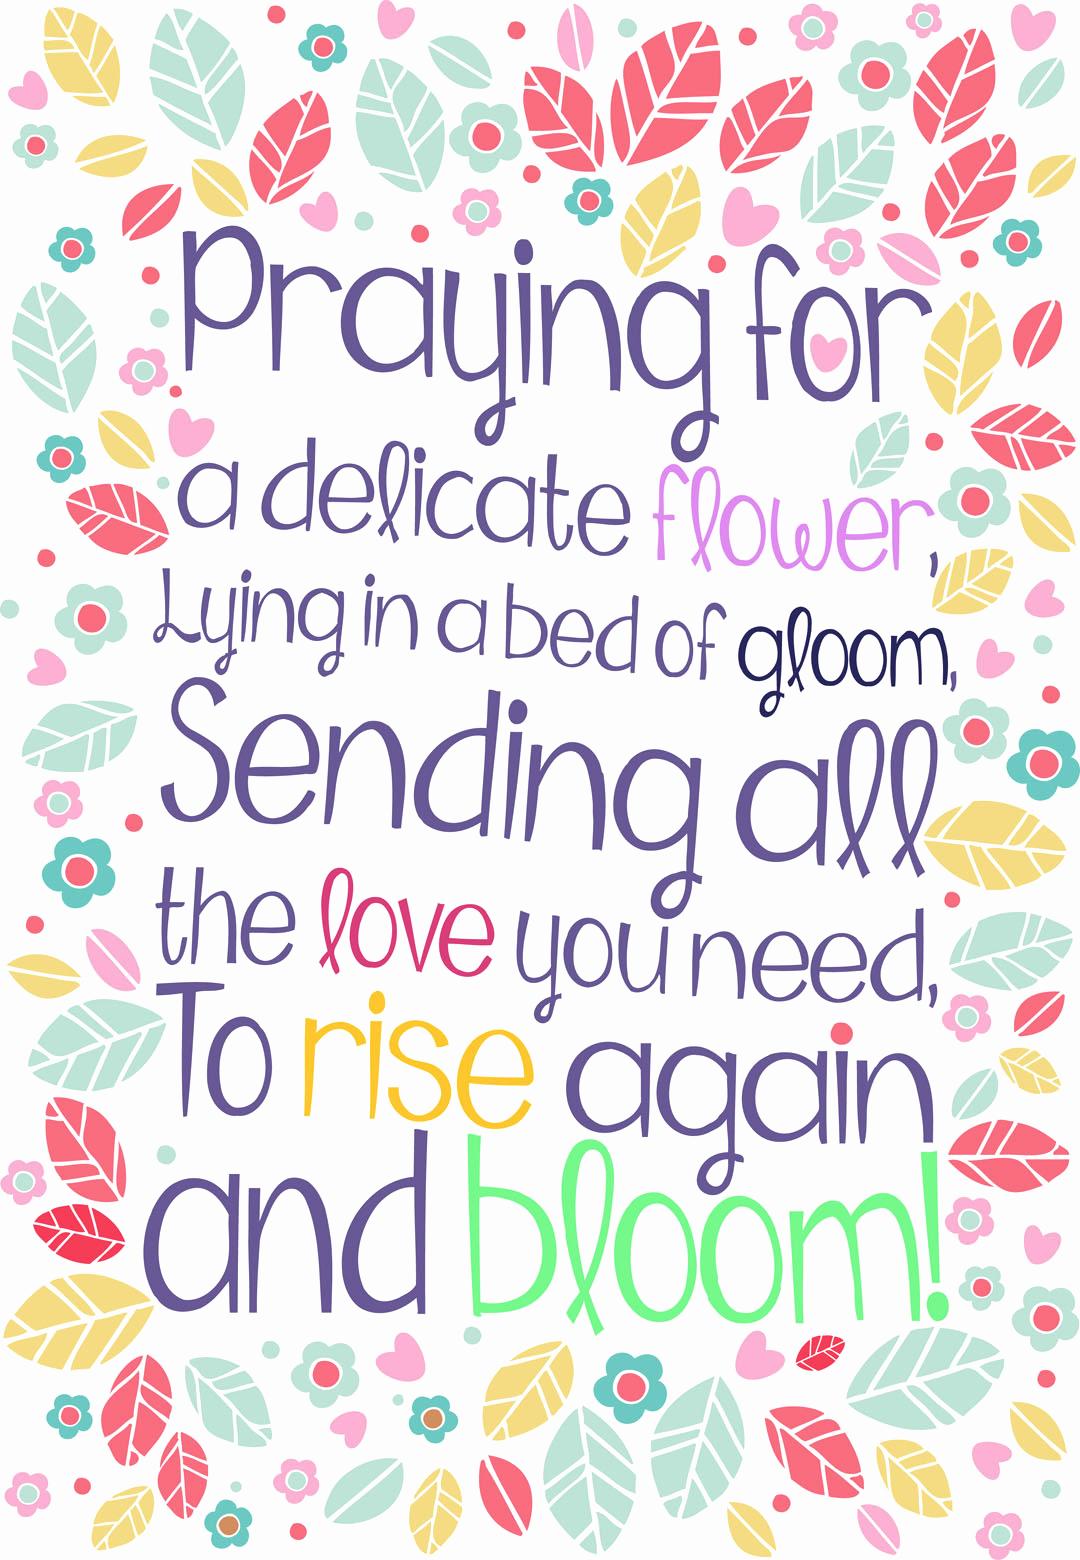 Get Well soon Printable Cards Elegant Rise Again and Bloom Free Get